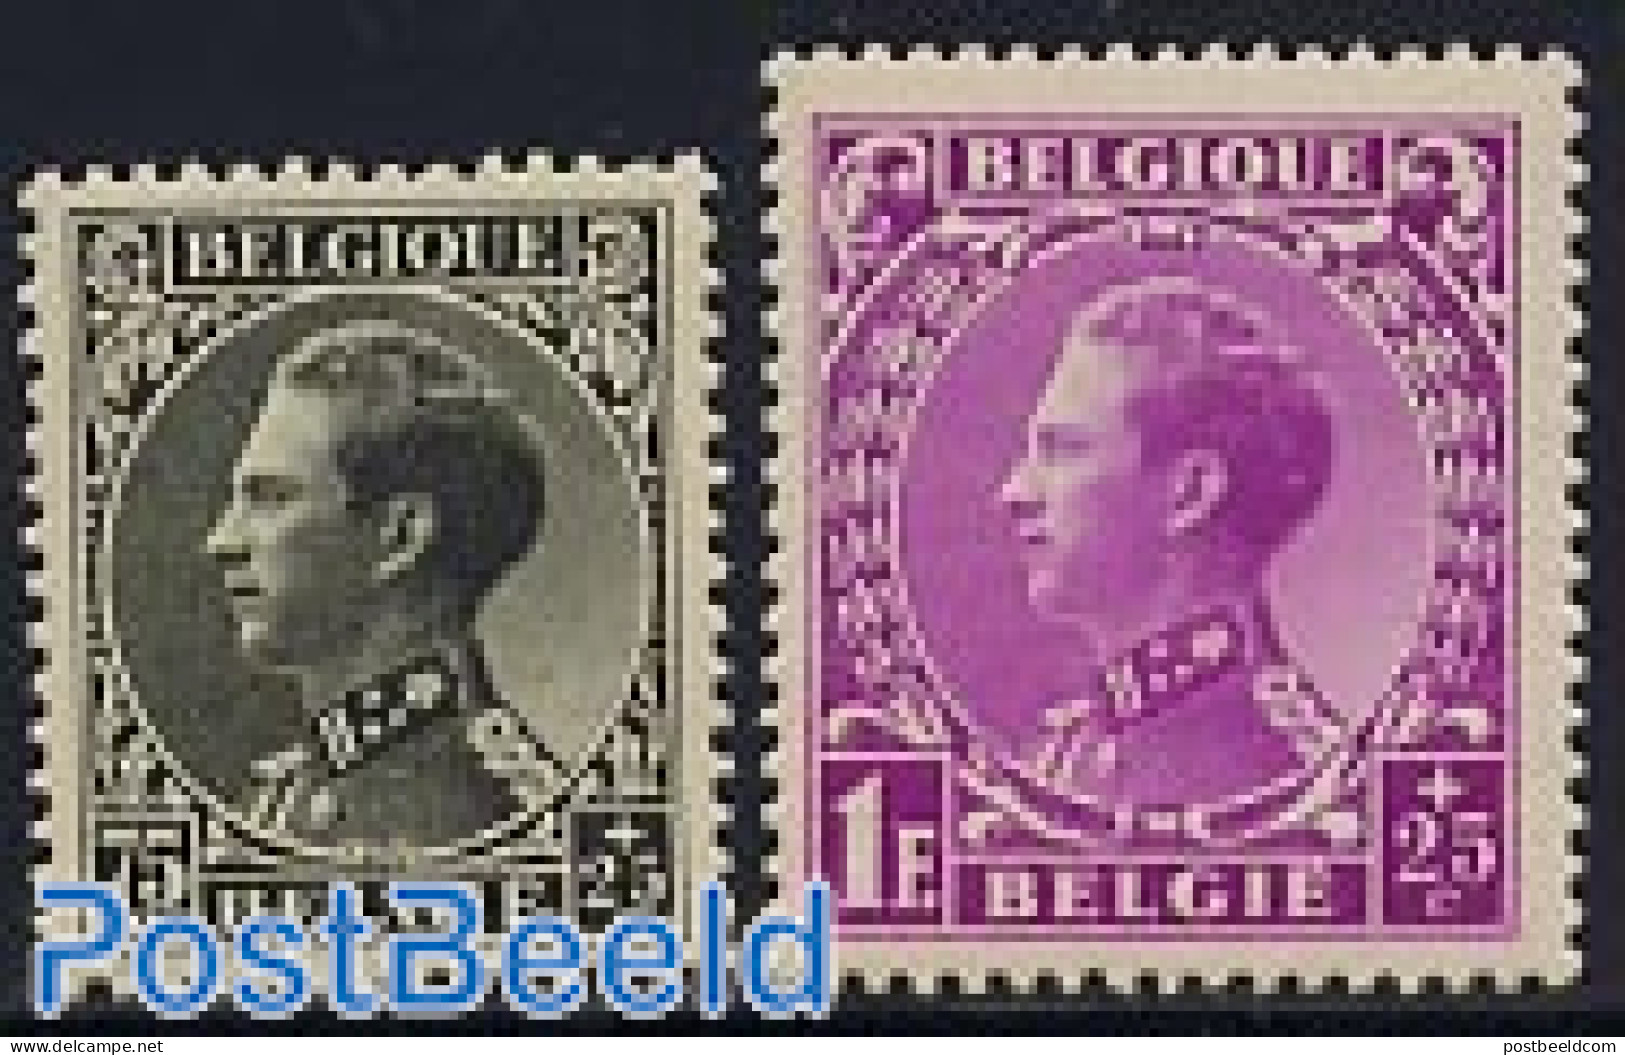 Belgium 1934 War Disabled 2v, Unused (hinged), Health - History - Disabled Persons - World War I - Ungebraucht